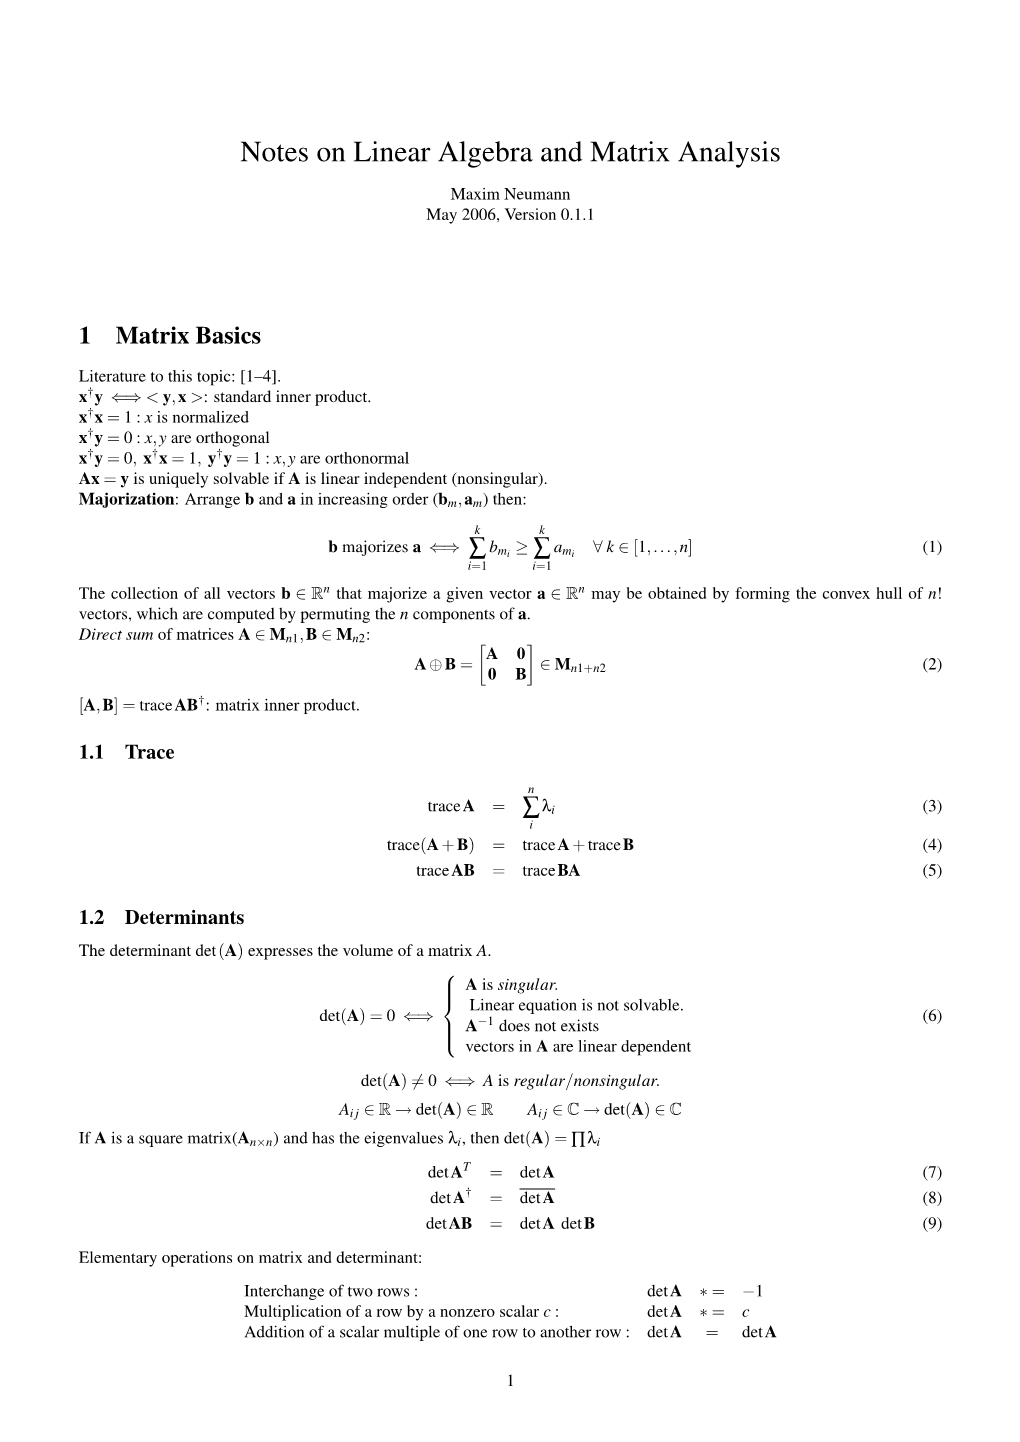 Notes on Linear Algebra and Matrix Analysis